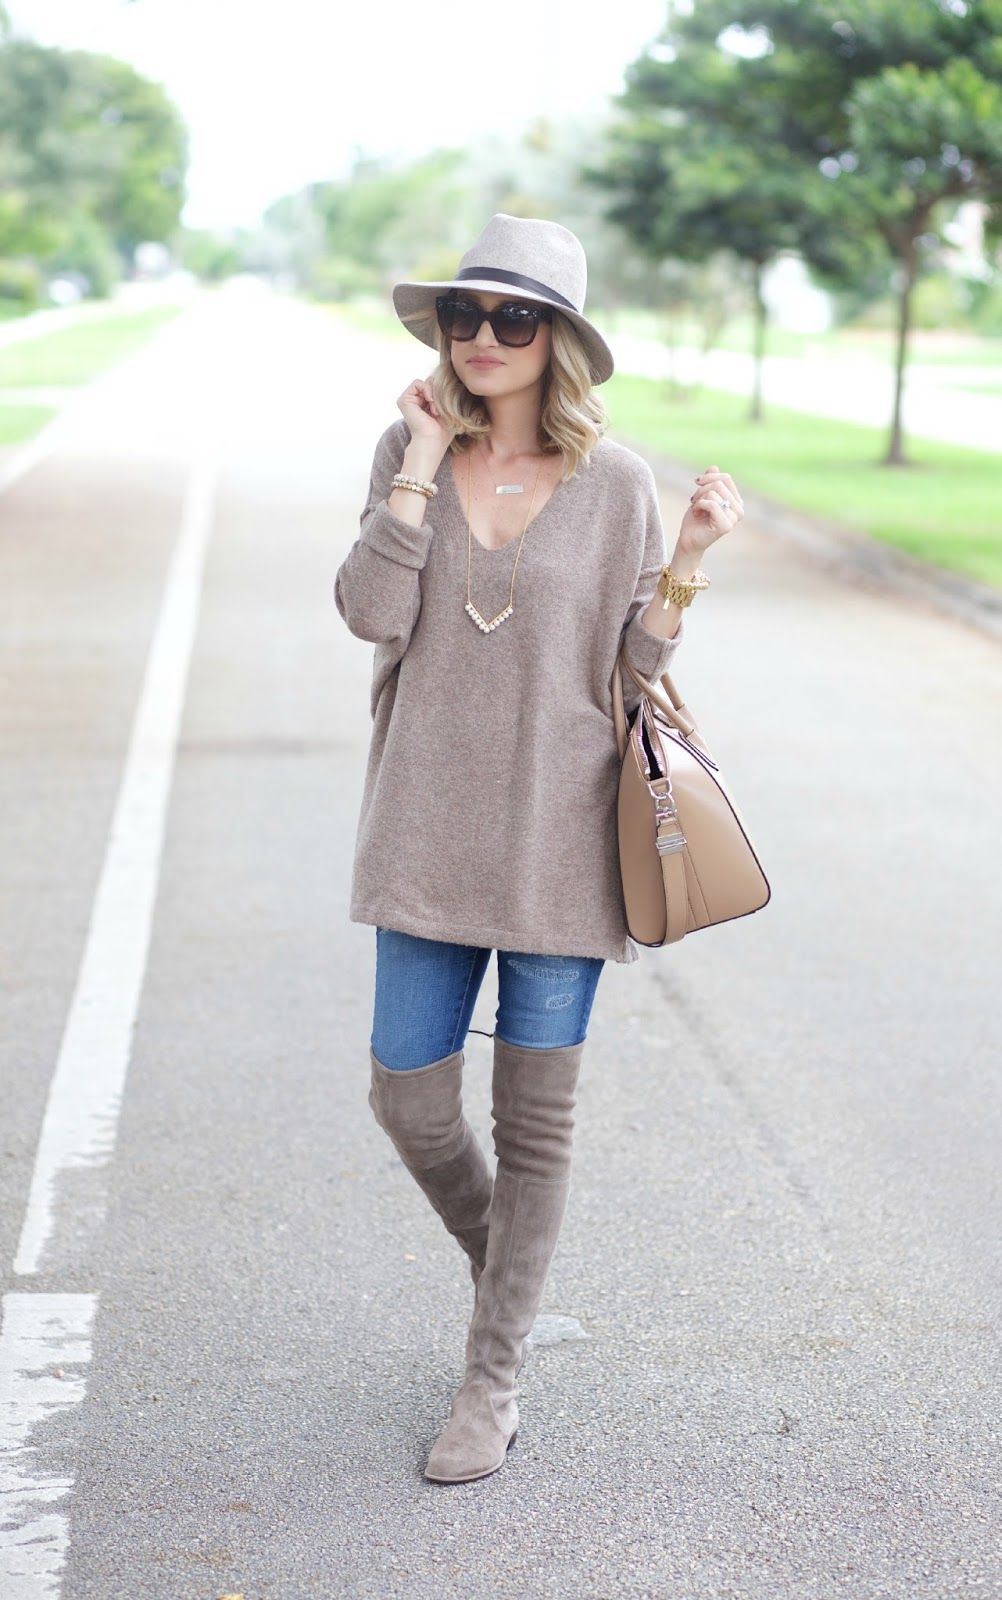 Oversized sweaters and over the knee boots Outfit.